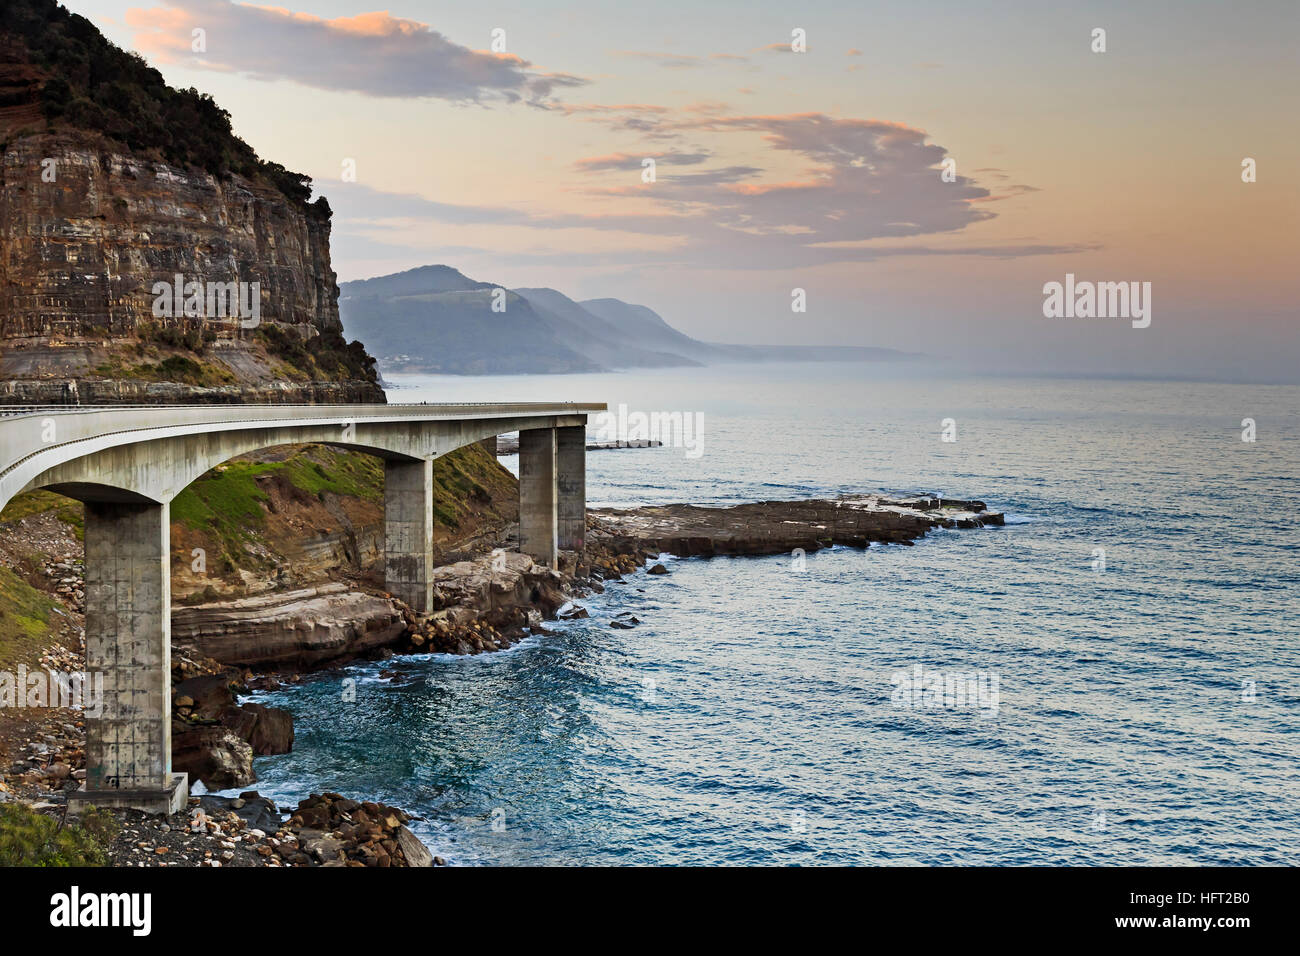 Side view of Sea Cliff Bridge on Grand Pacific Drive in Australia. Bright sunset over pacific ocean from scenic tourism motor way facing hilly coast. Stock Photo